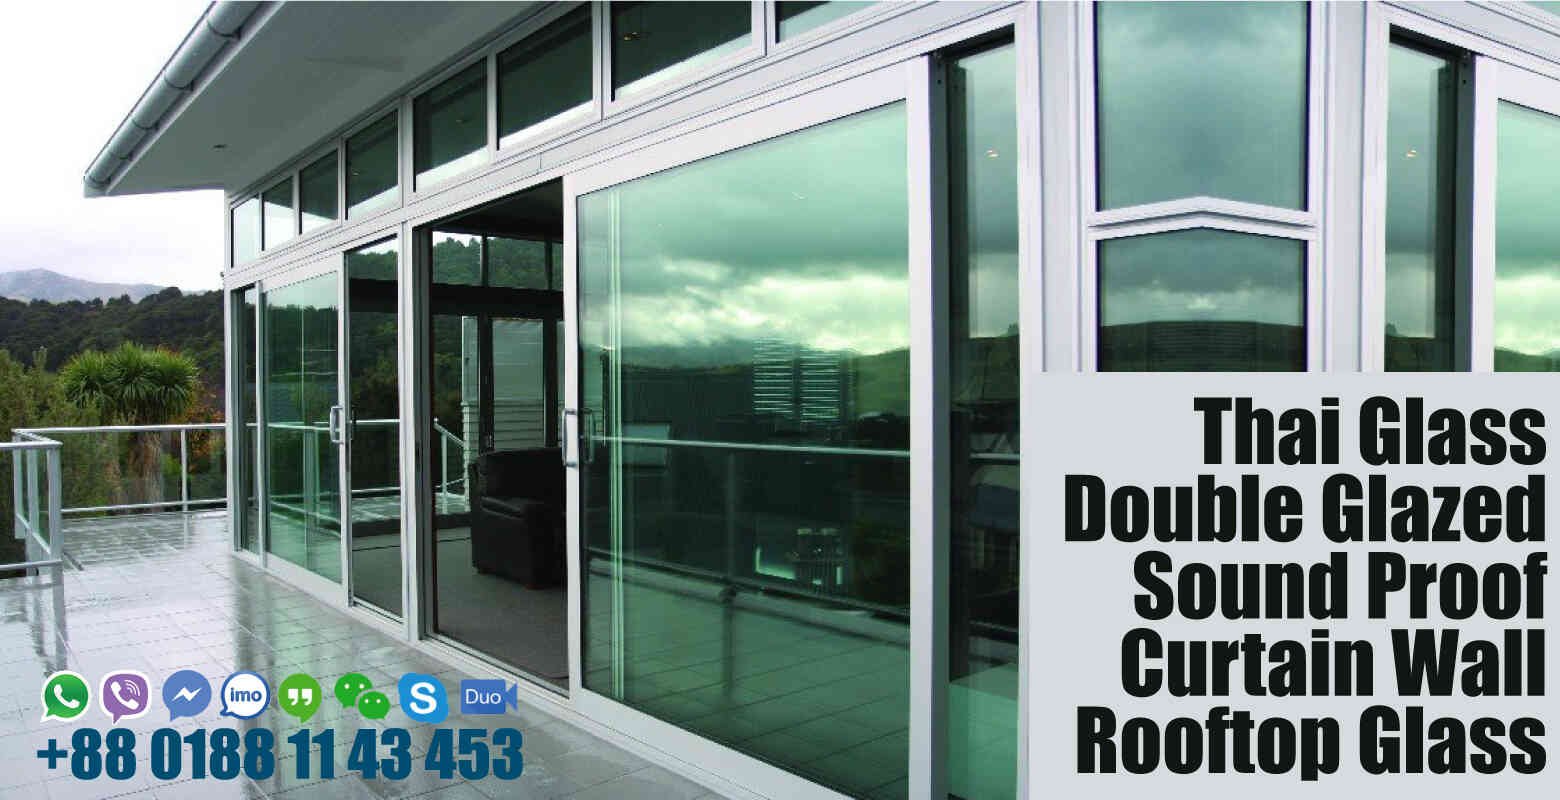 Thai Glass Double Glazed Sound Proof Curtain Wall Rooftop Glass